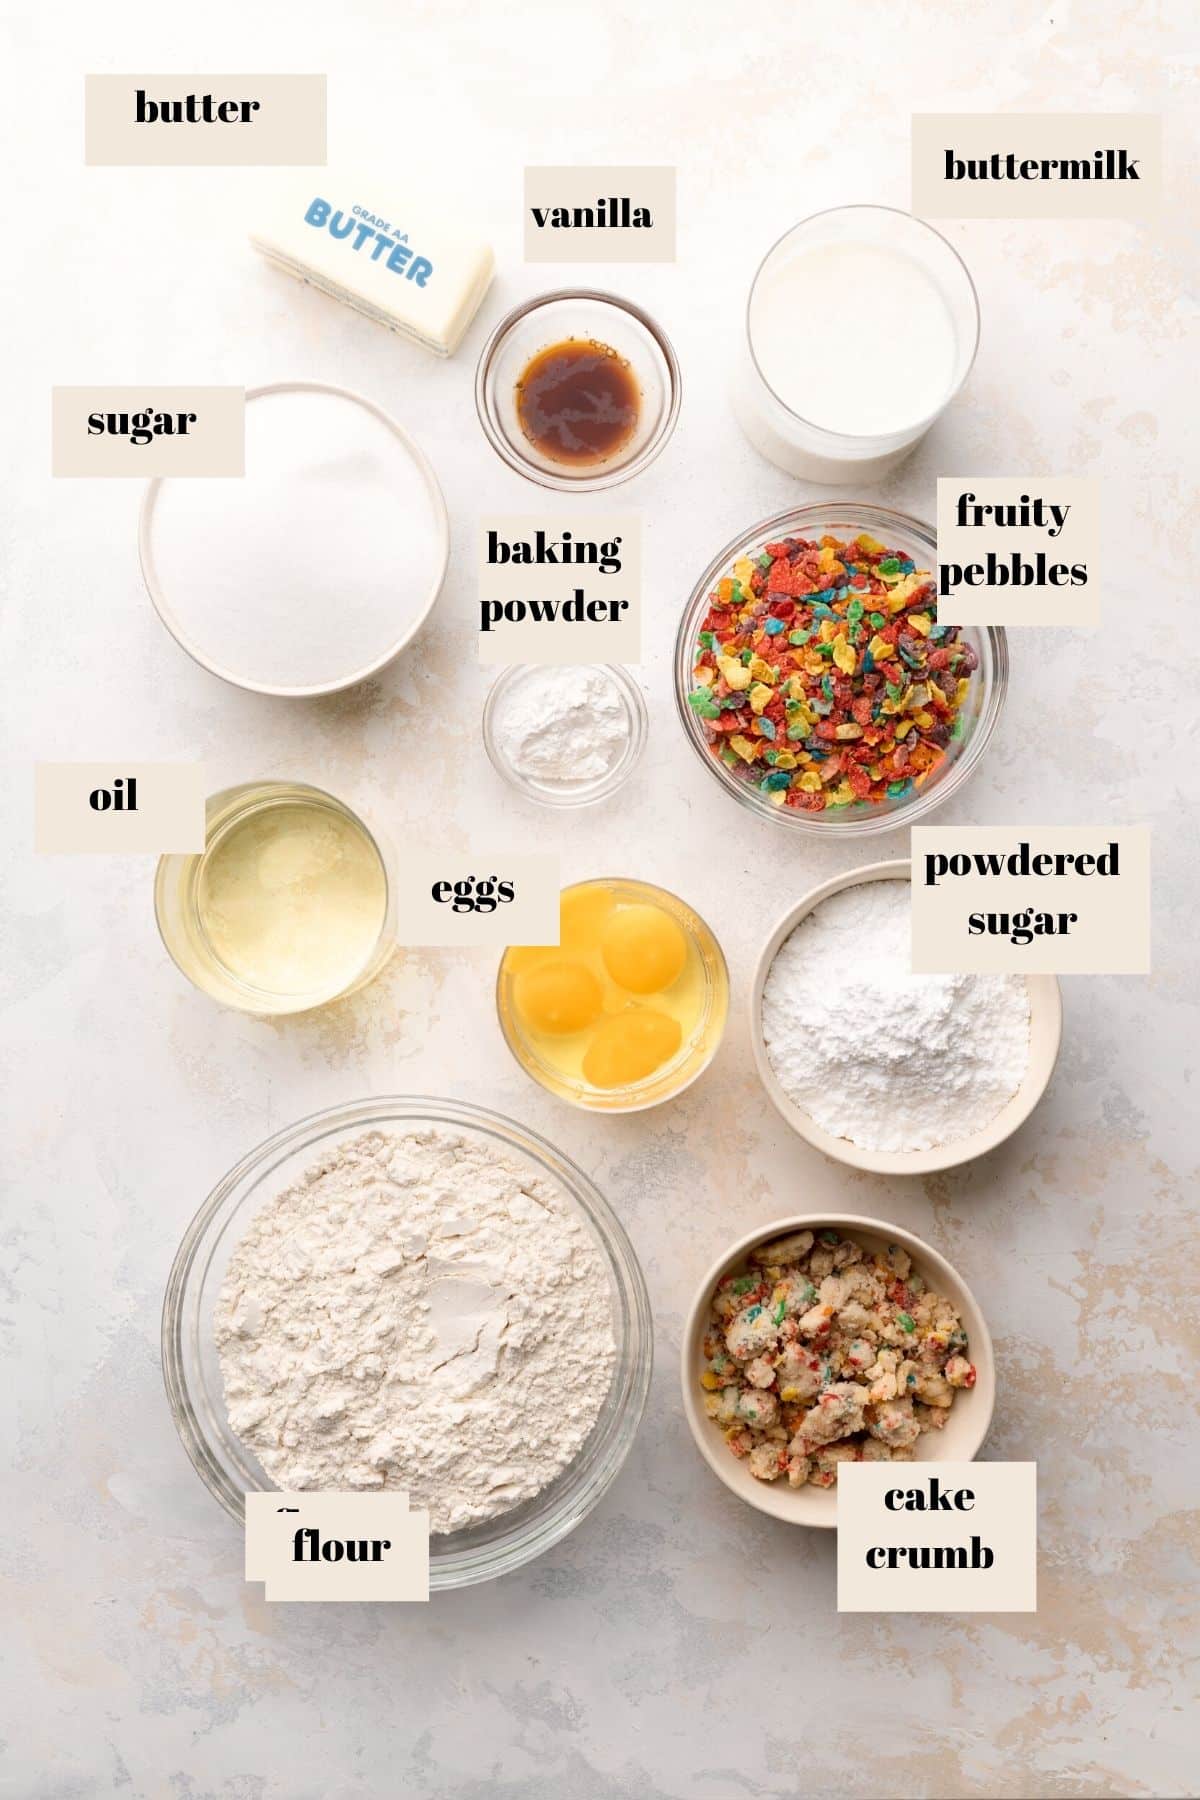 the ingredients needed to make the fruity pebble cake.